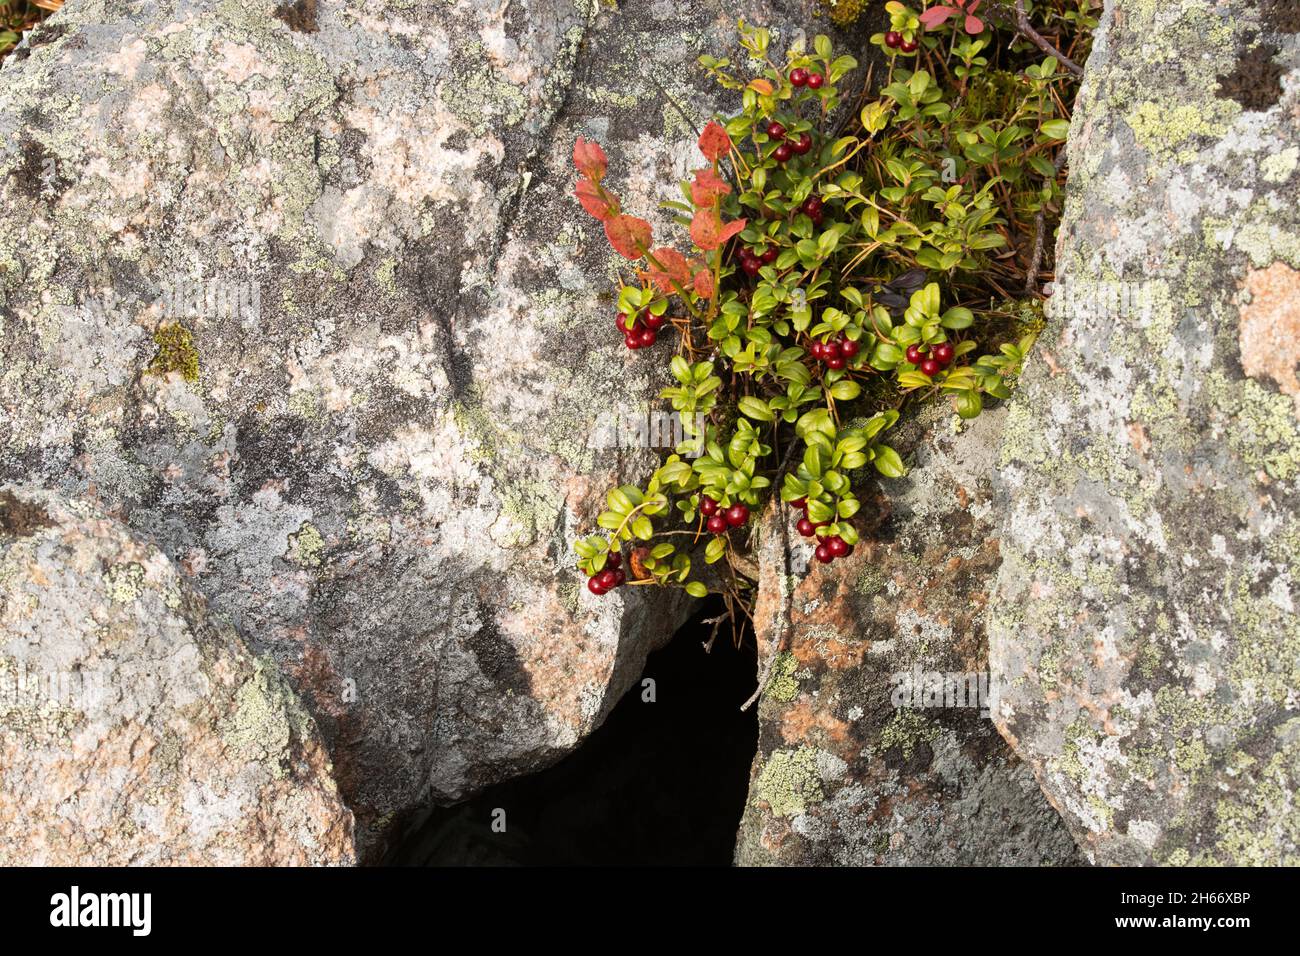 Lingonberry, Vaccinium vitis-idaea growing on a rock in Northern Finland. Stock Photo